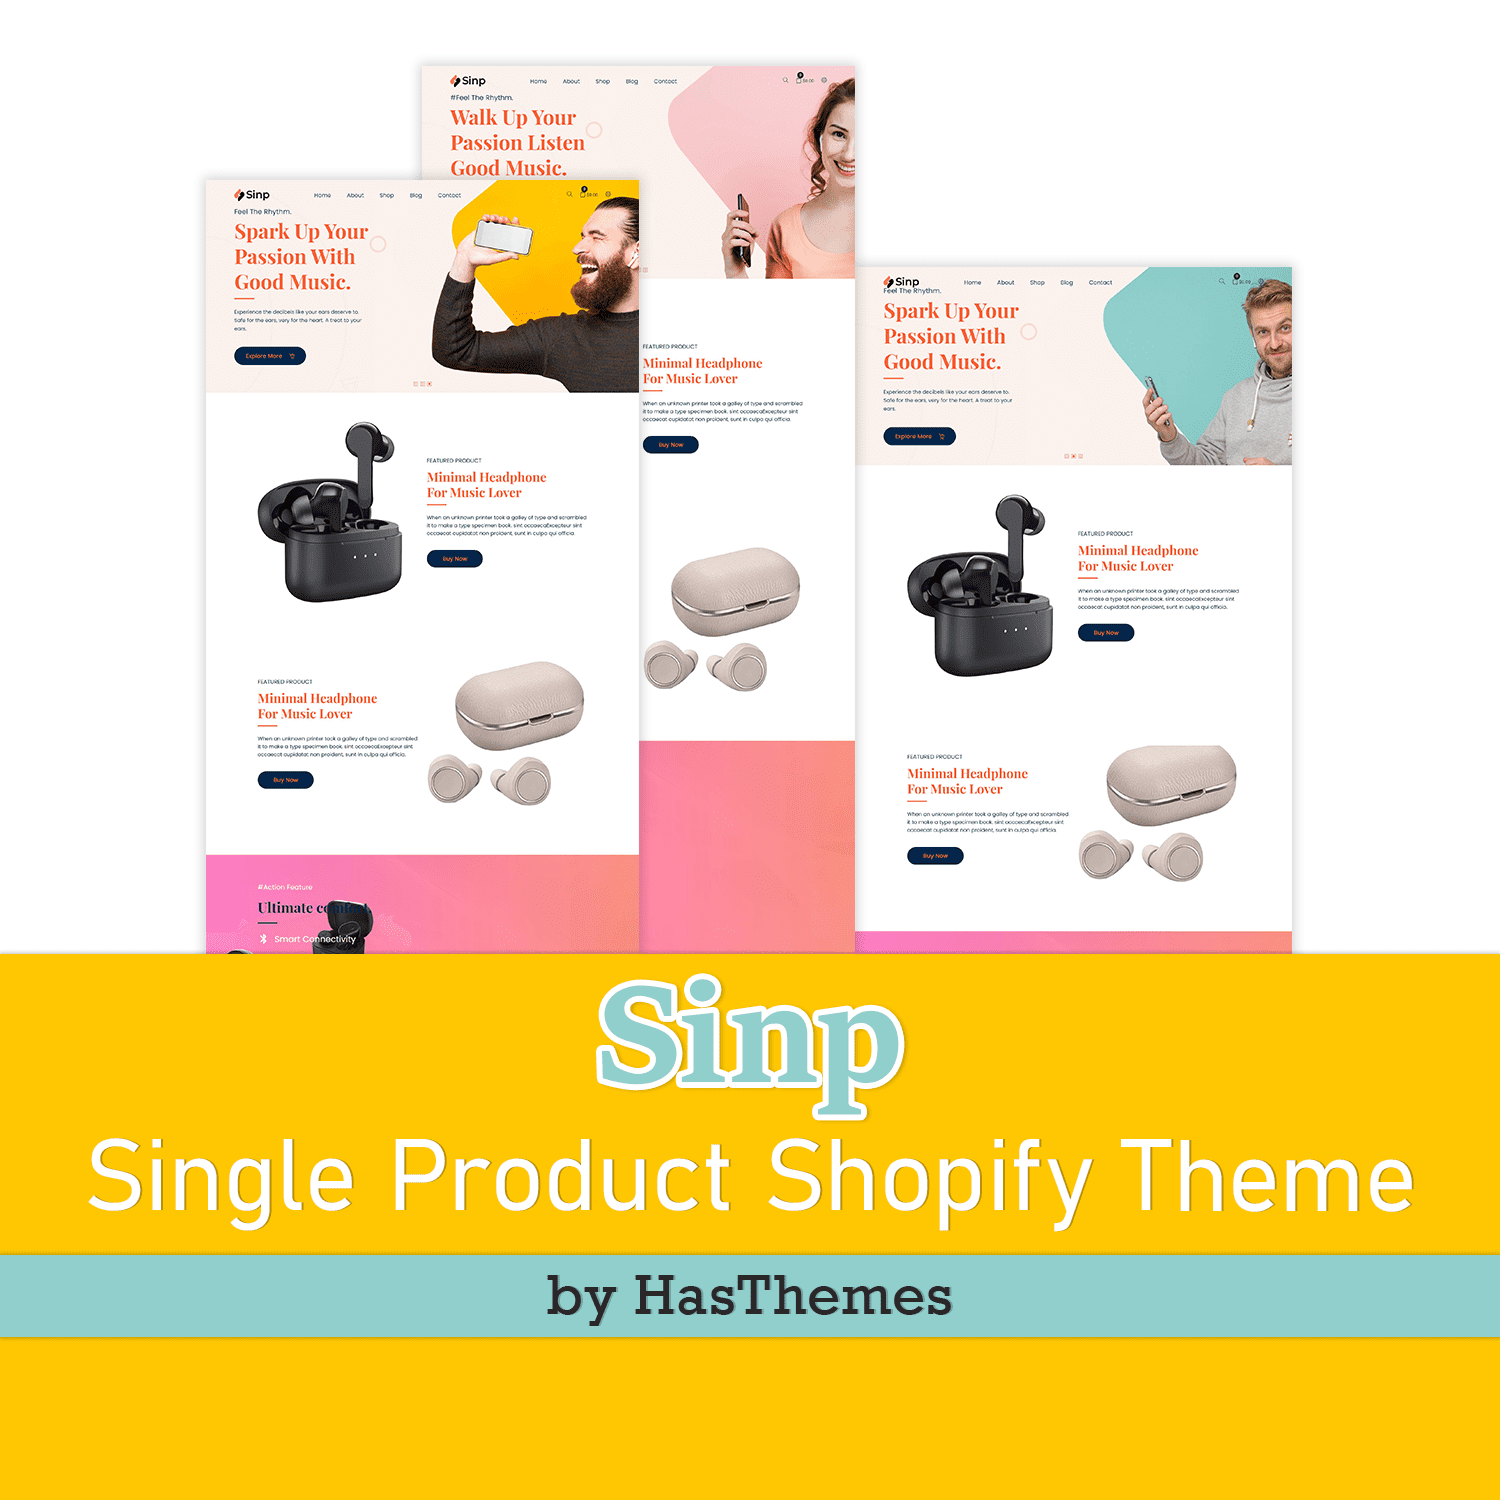 https://creativemarket.com/hasthemes/6218581-Single-Product-Shopify-Theme-Sinp cover.